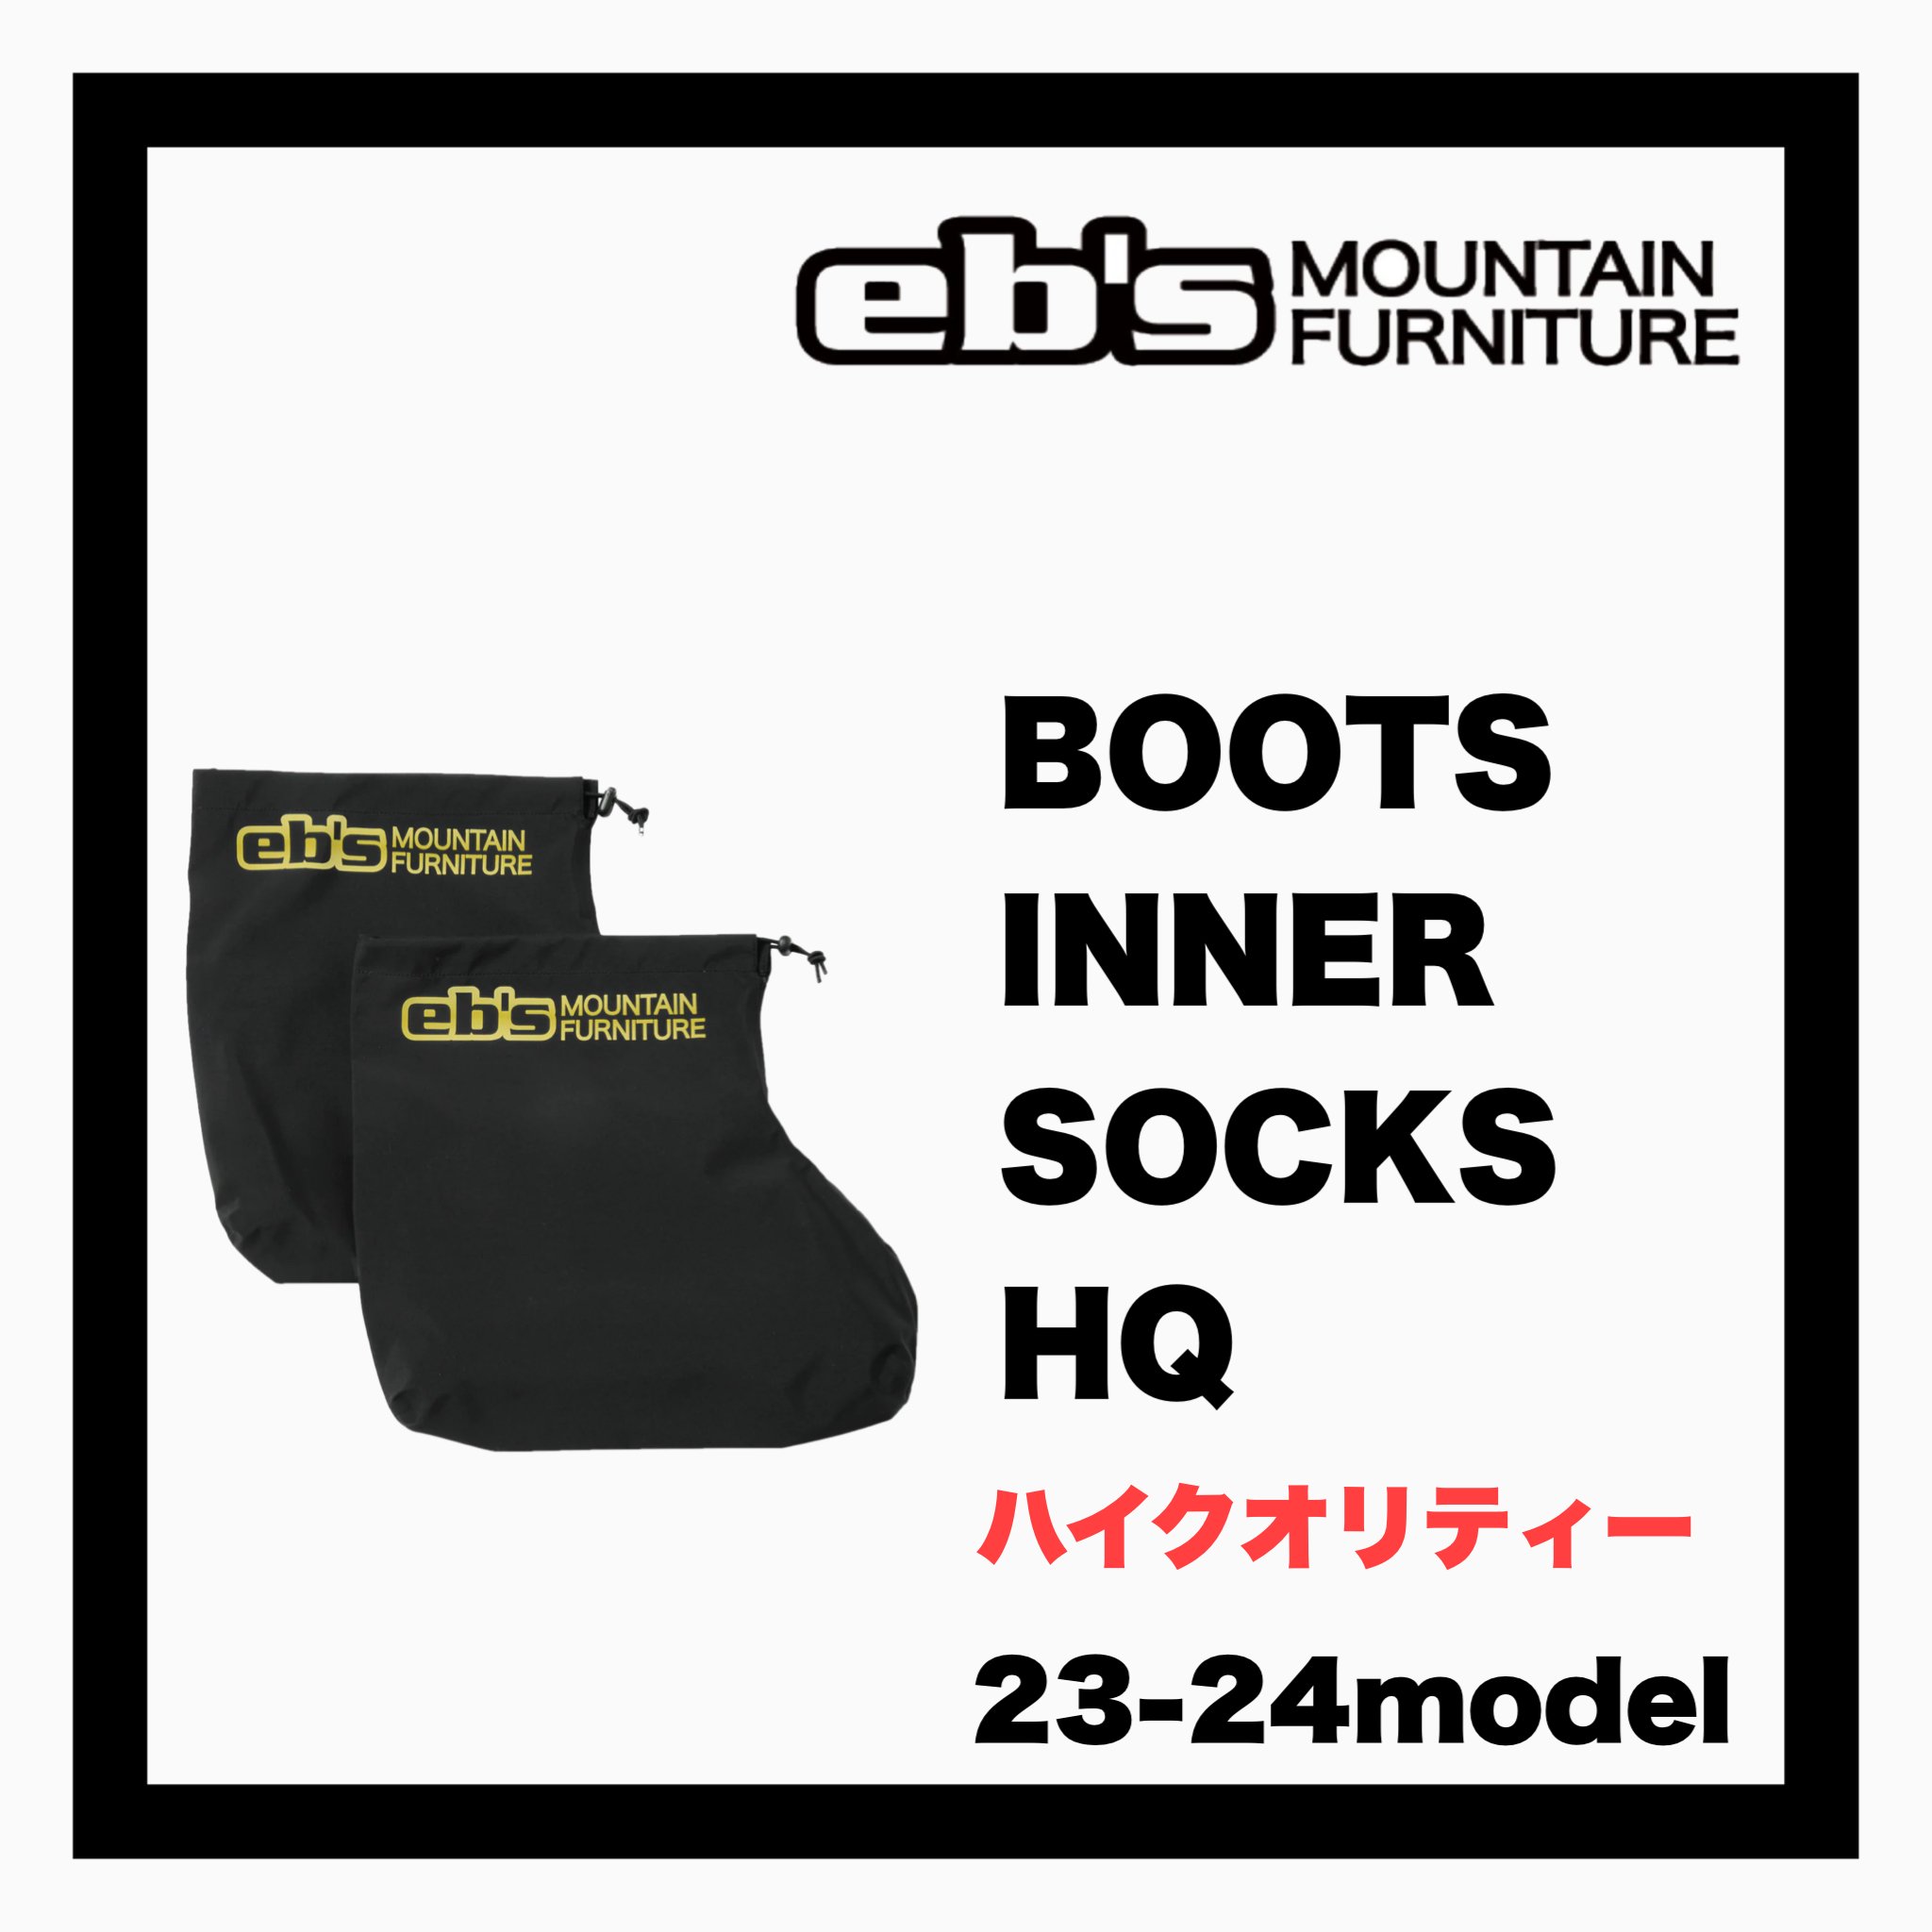 <img class='new_mark_img1' src='https://img.shop-pro.jp/img/new/icons35.gif' style='border:none;display:inline;margin:0px;padding:0px;width:auto;' />eb'sBOOTS INNER SOCKS HQ